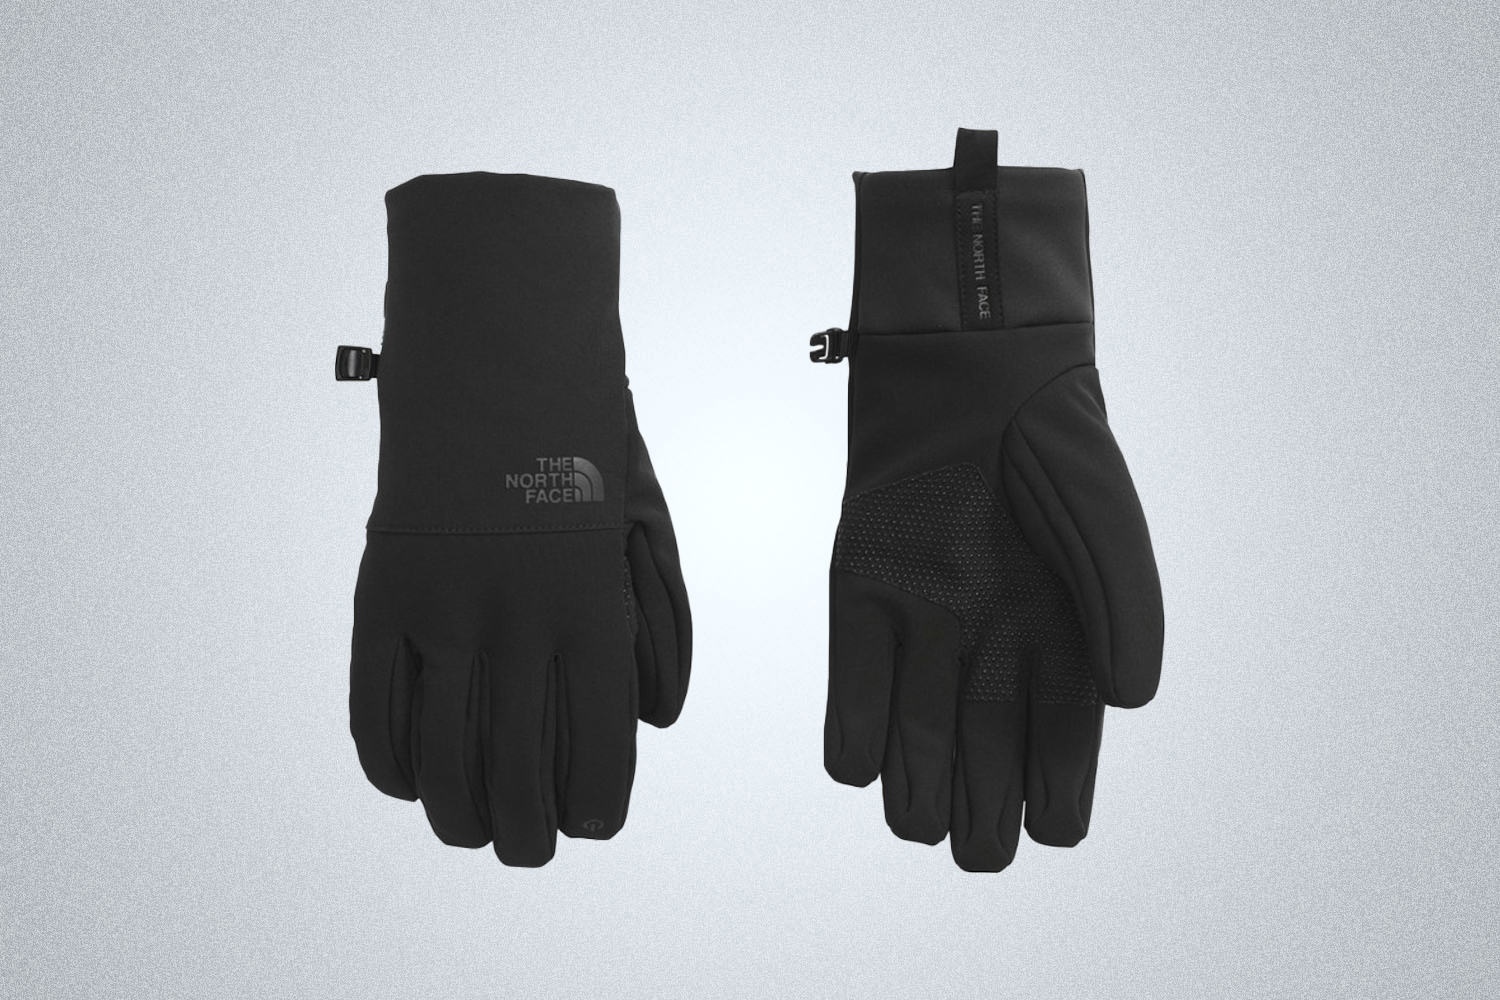 Throw on The North Face Apex+ Etip Gloves for winter travel and potential emergencies in 2022